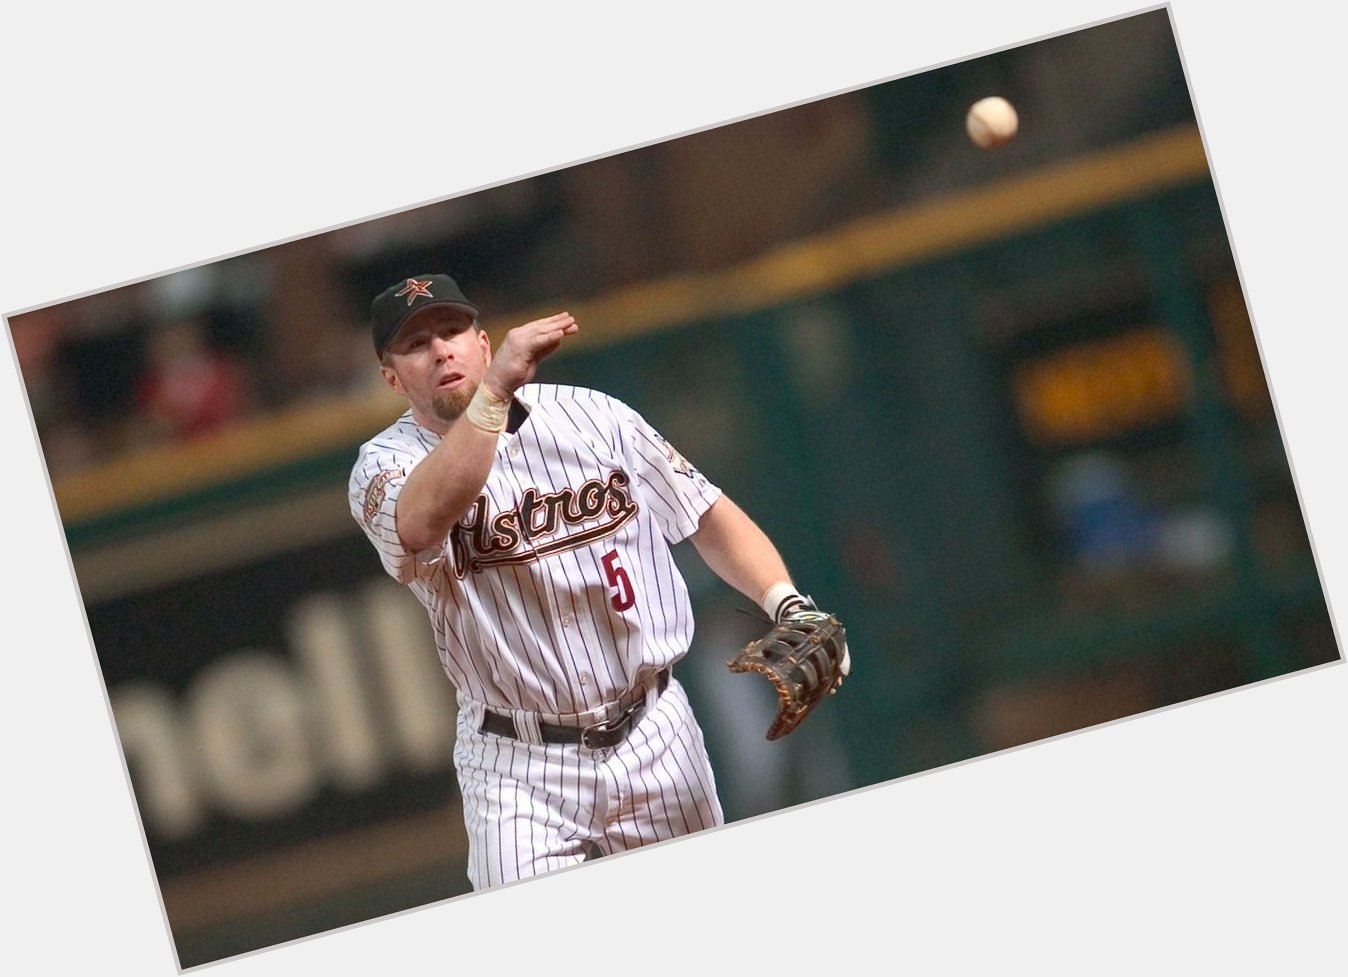 Happy birthday to Hall of Fame first baseman, Jeff Bagwell! 